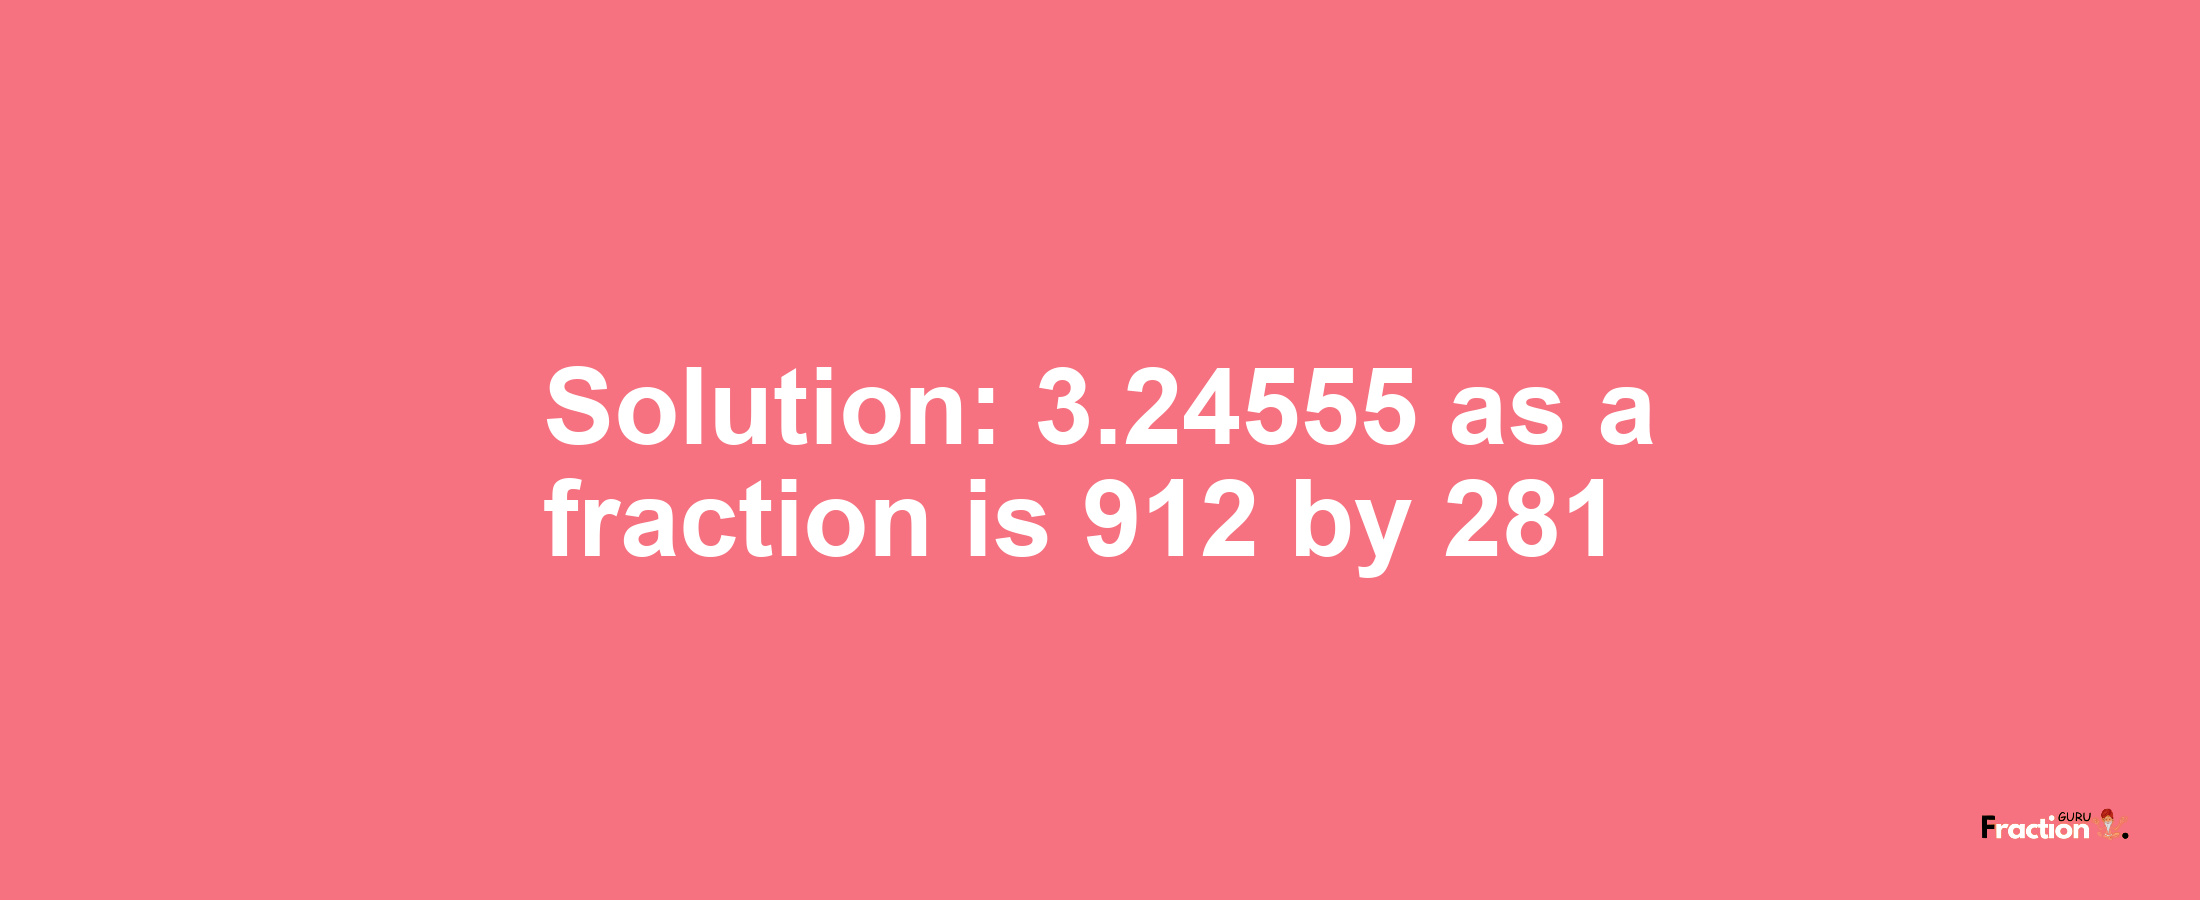 Solution:3.24555 as a fraction is 912/281